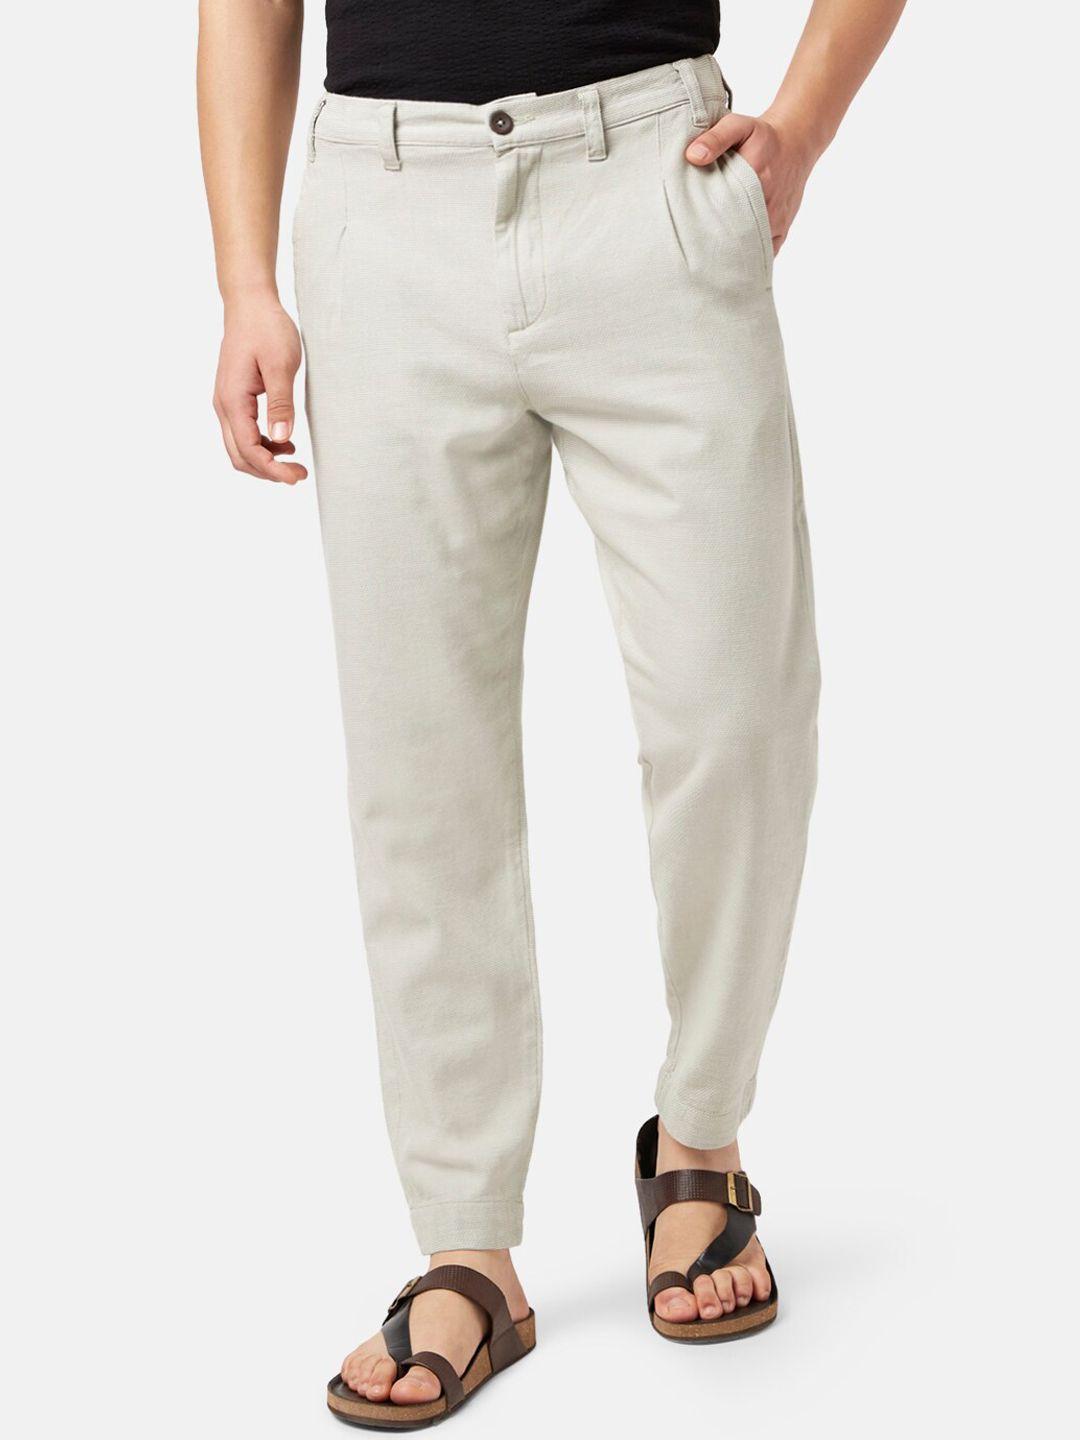 7 alt by pantaloons men cream-coloured textured trousers